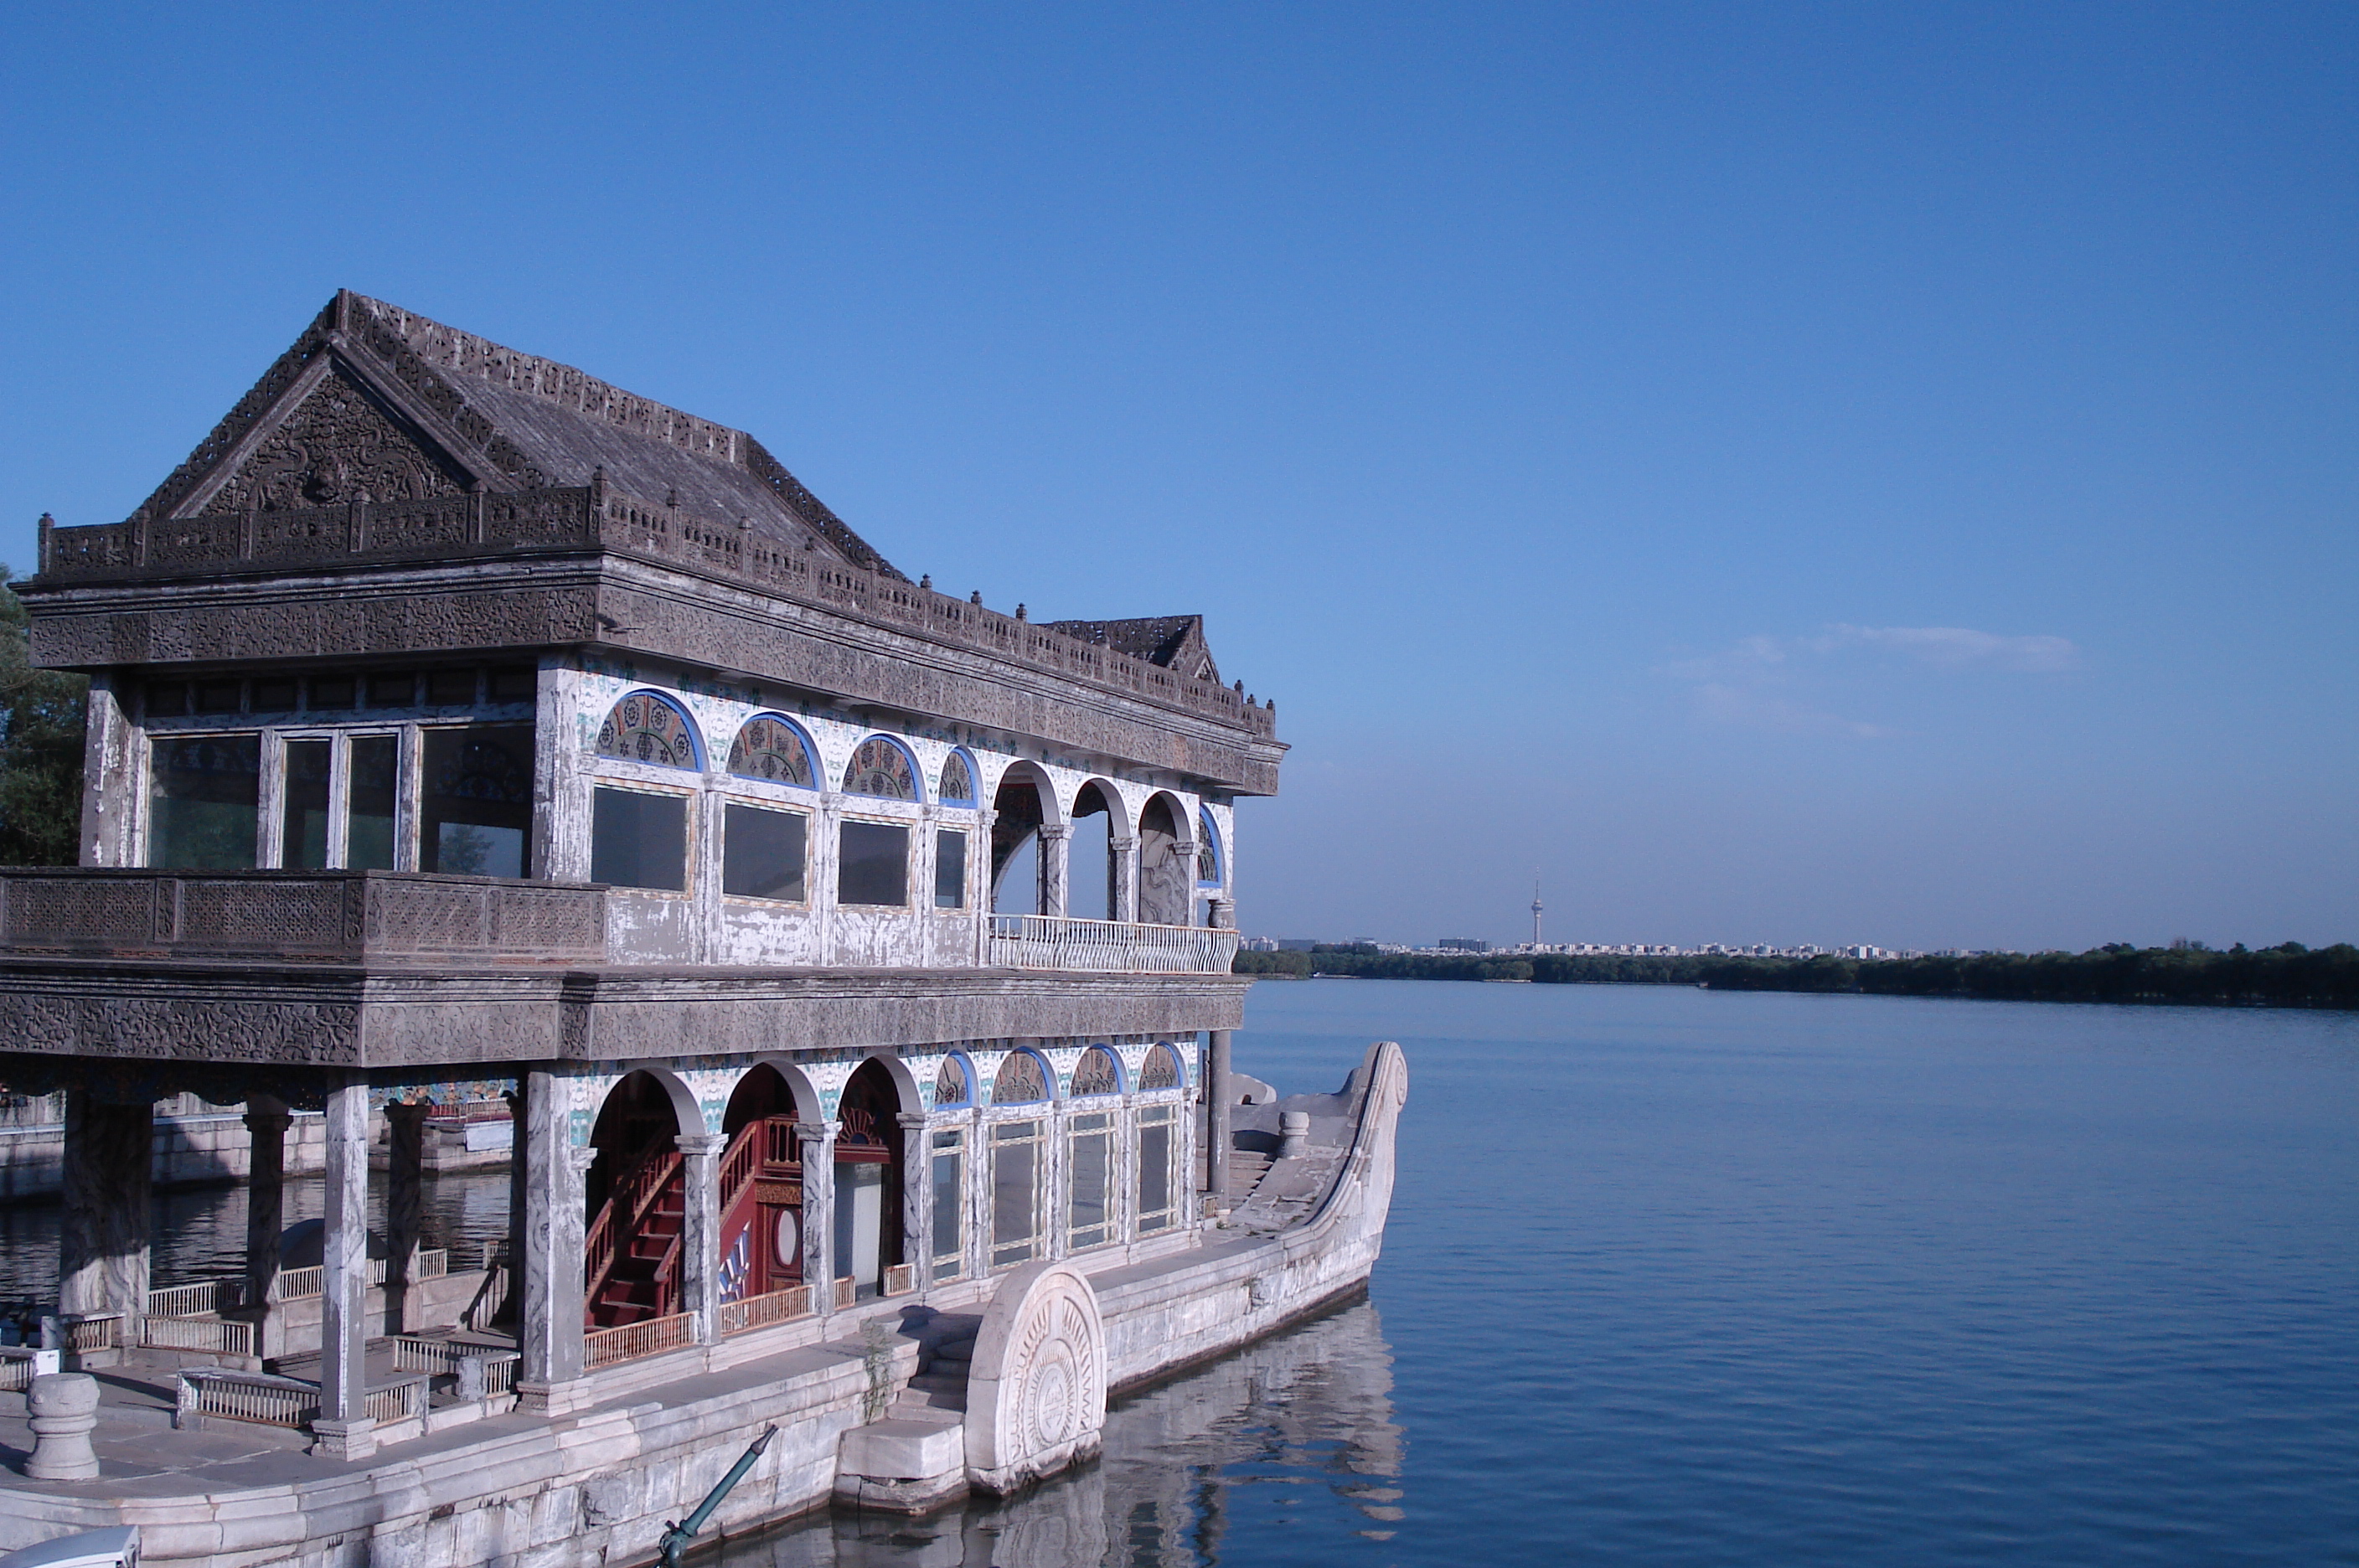 Marble_Boat_in_Summer_Palace